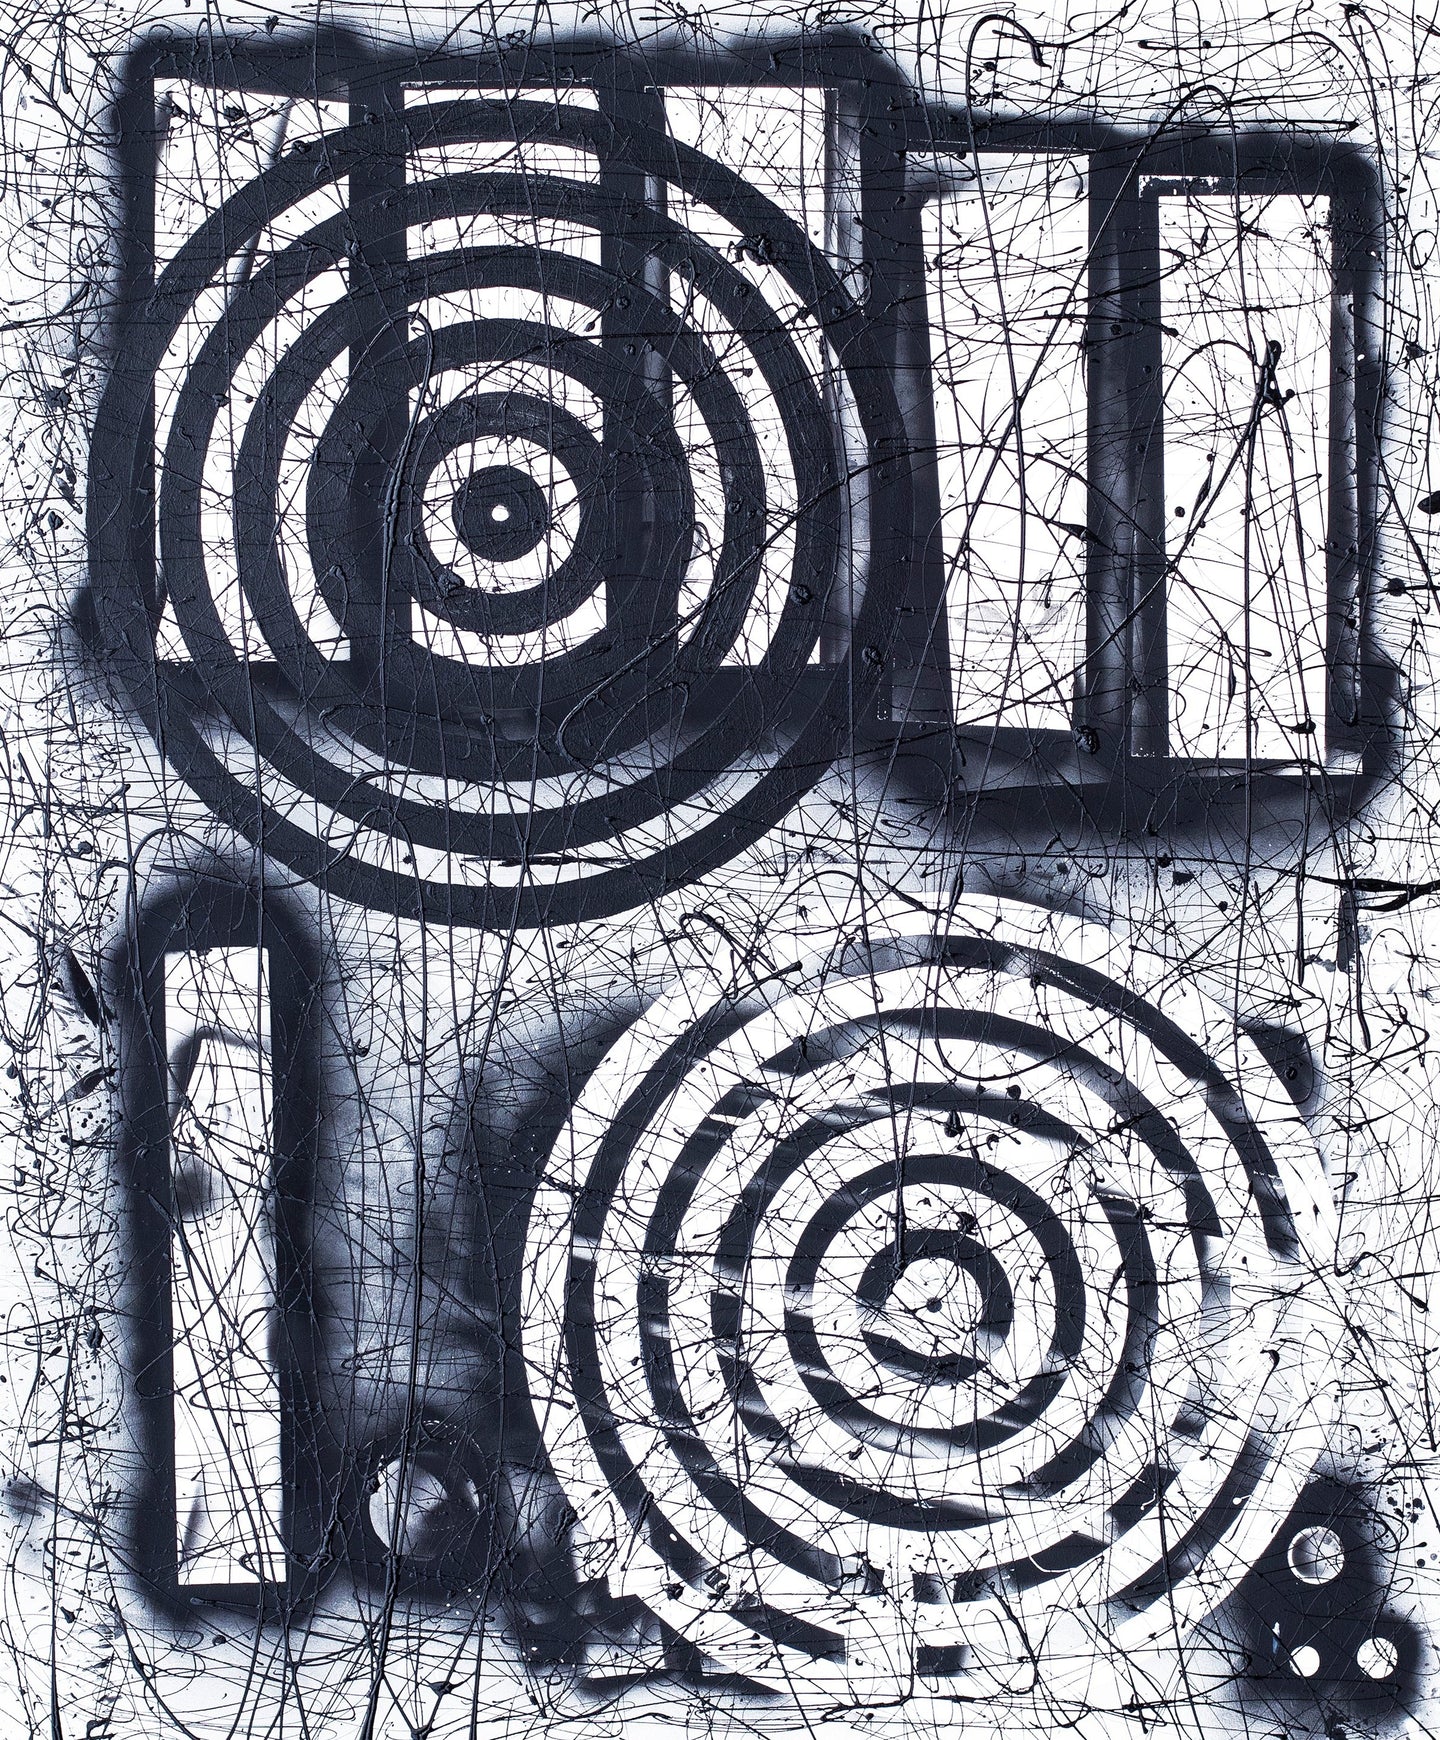 J. Steven Manolis, Black & White Shadowbox, 2019, Acrylic on canvas, 72 x 60 inches, Large Black and White Wall Art, Abstract expressionism art for sale at Manolis Projects Art Gallery, Miami, Fl